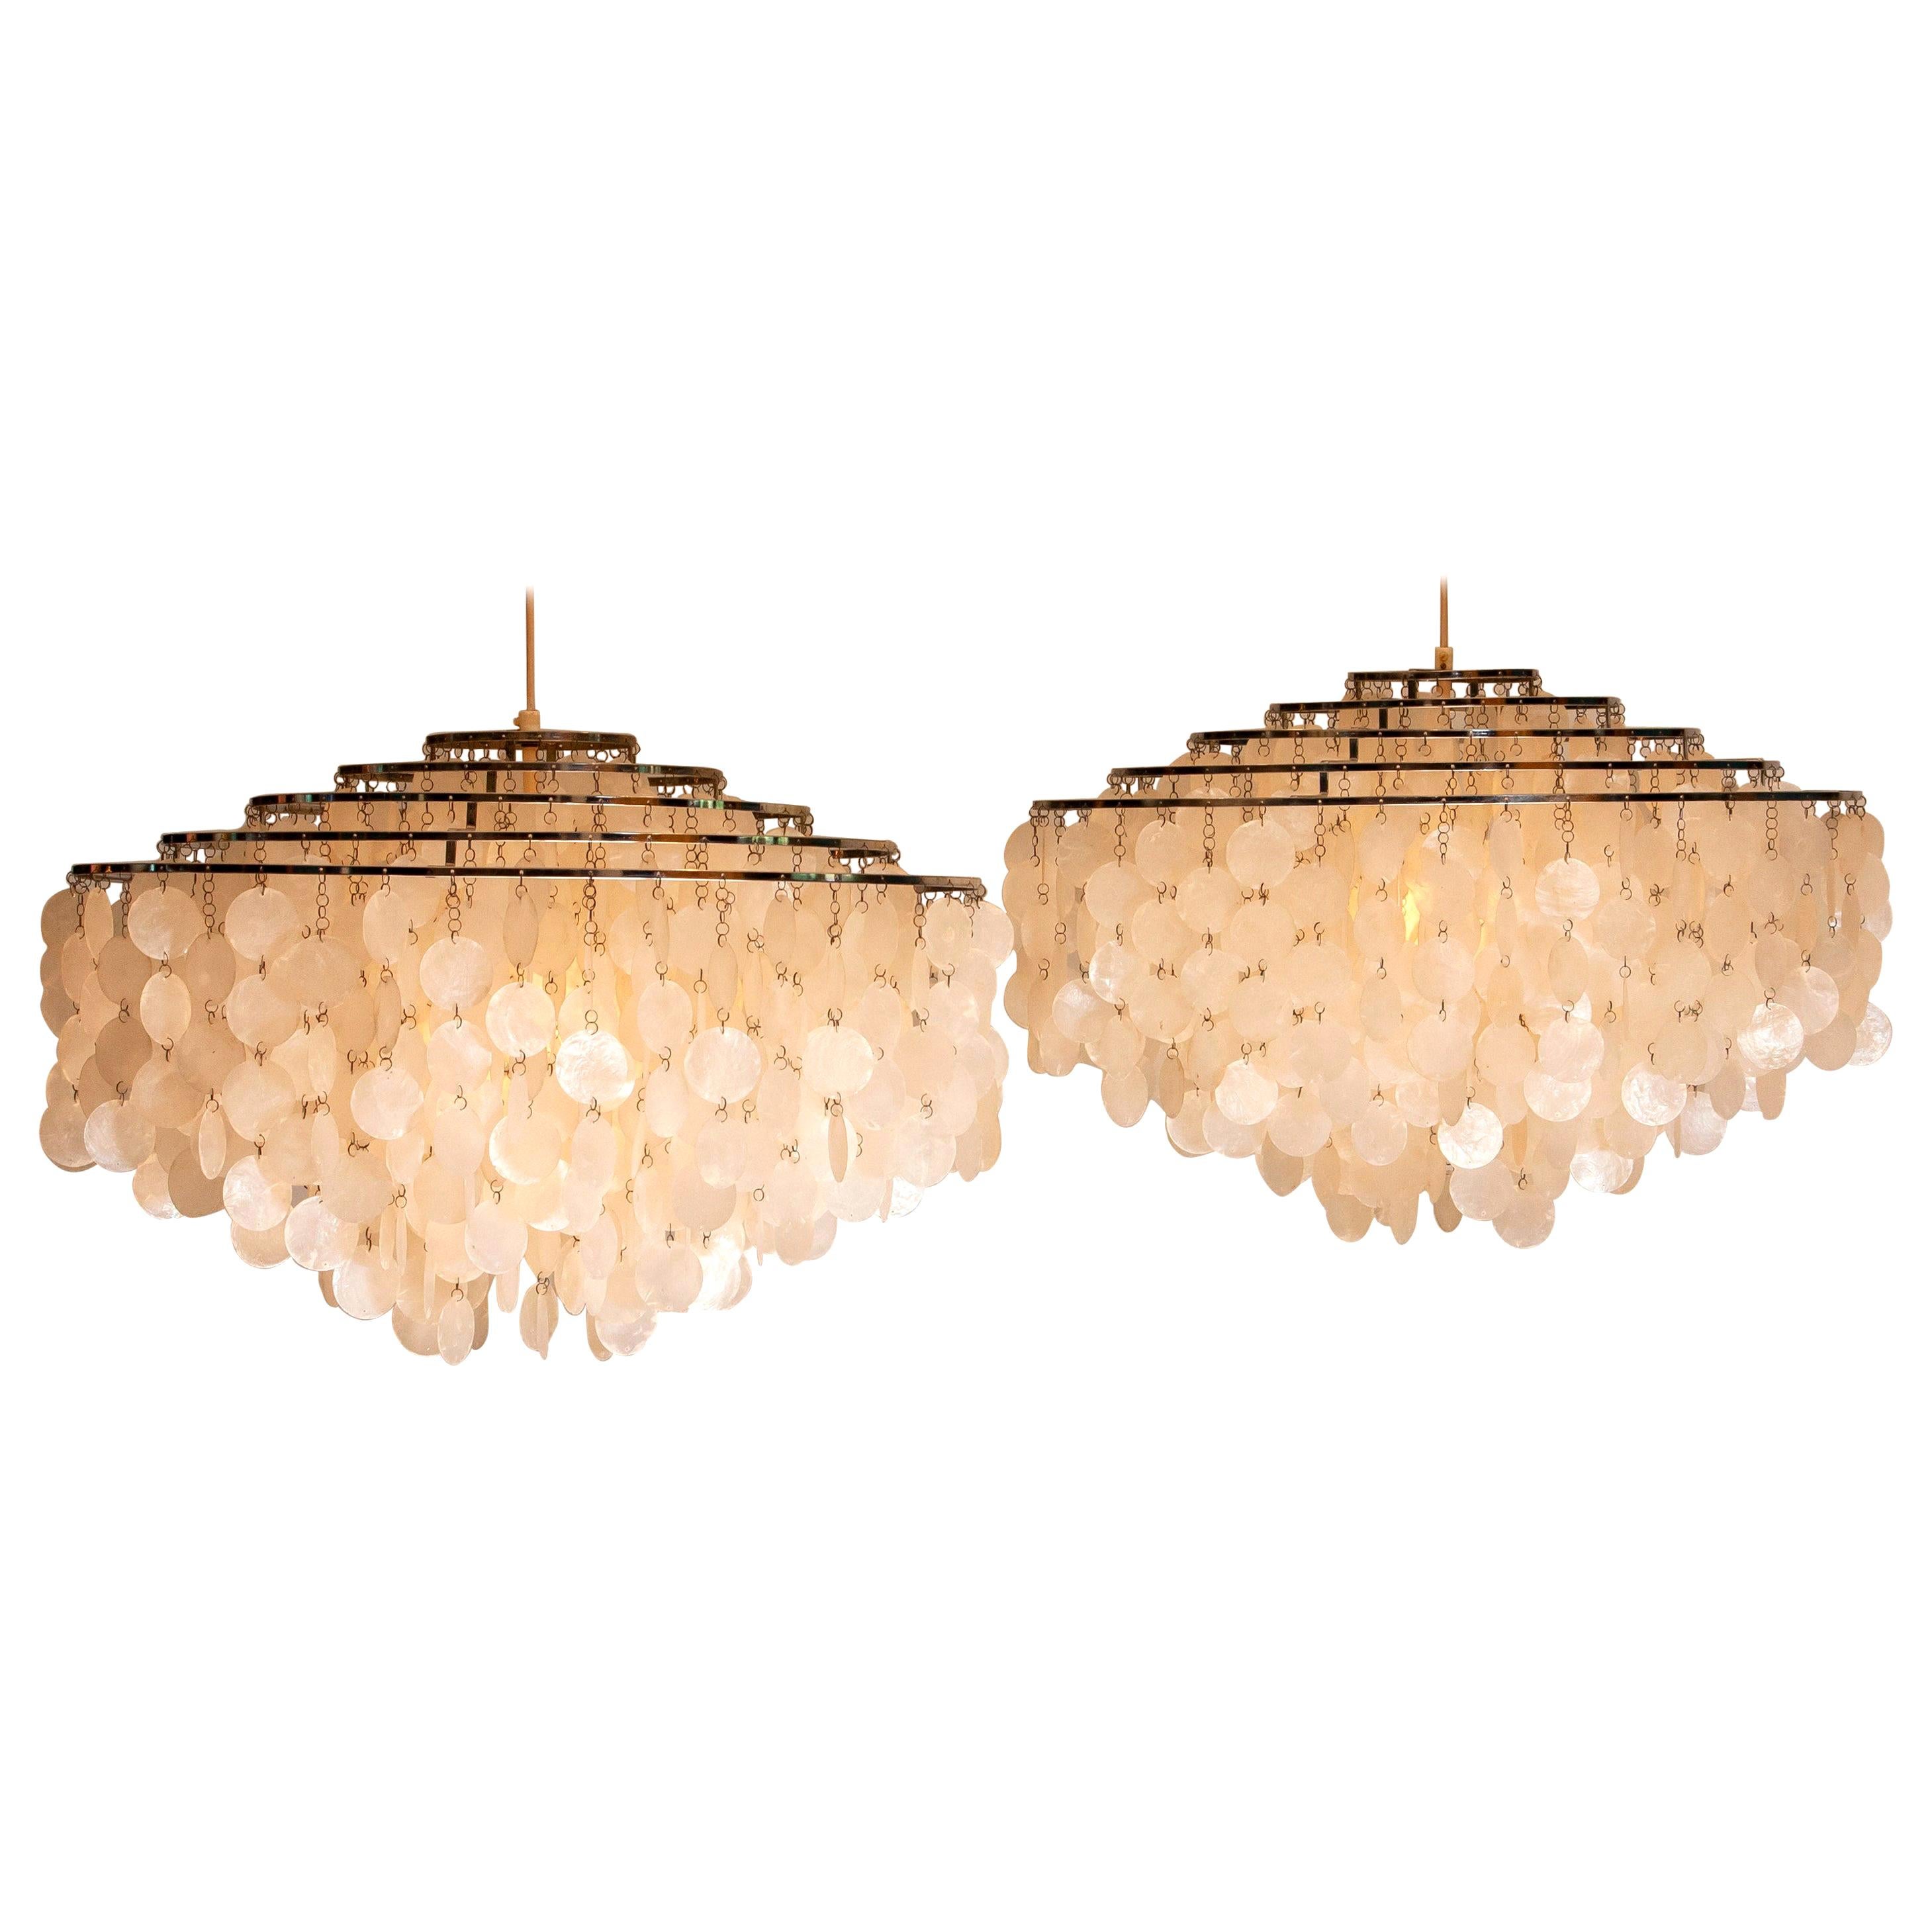 Beautiful set of two complete original extra large capiz shell chandeliers designed by Verner Panton for J. Luber Ag in Switzerland, 1964.
These two extra large chandeliers measures a diameter of 70cm. or 27.56